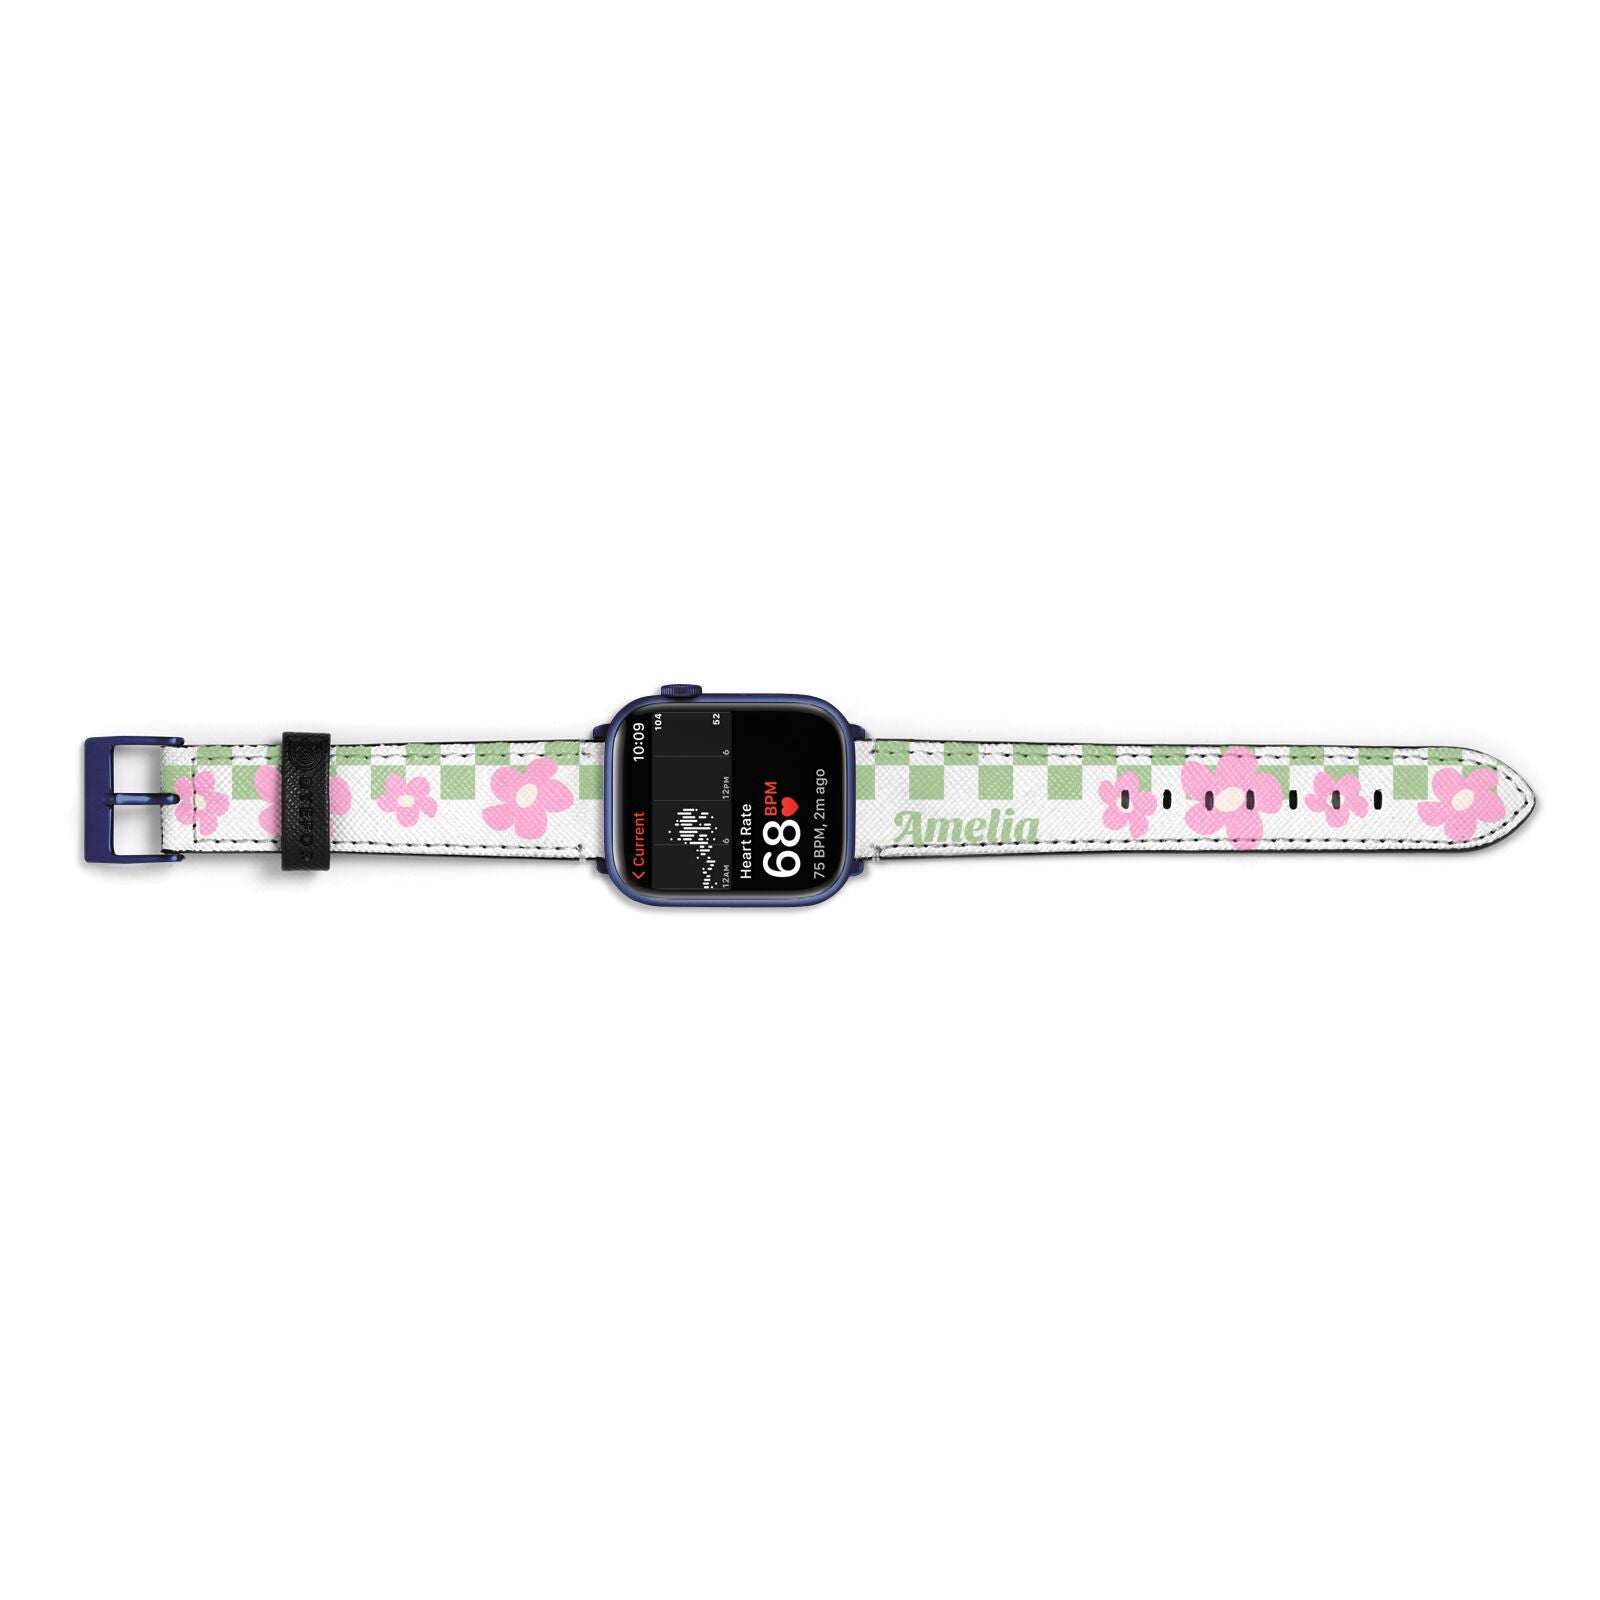 Personalised Check Floral Apple Watch Strap Size 38mm Landscape Image Blue Hardware